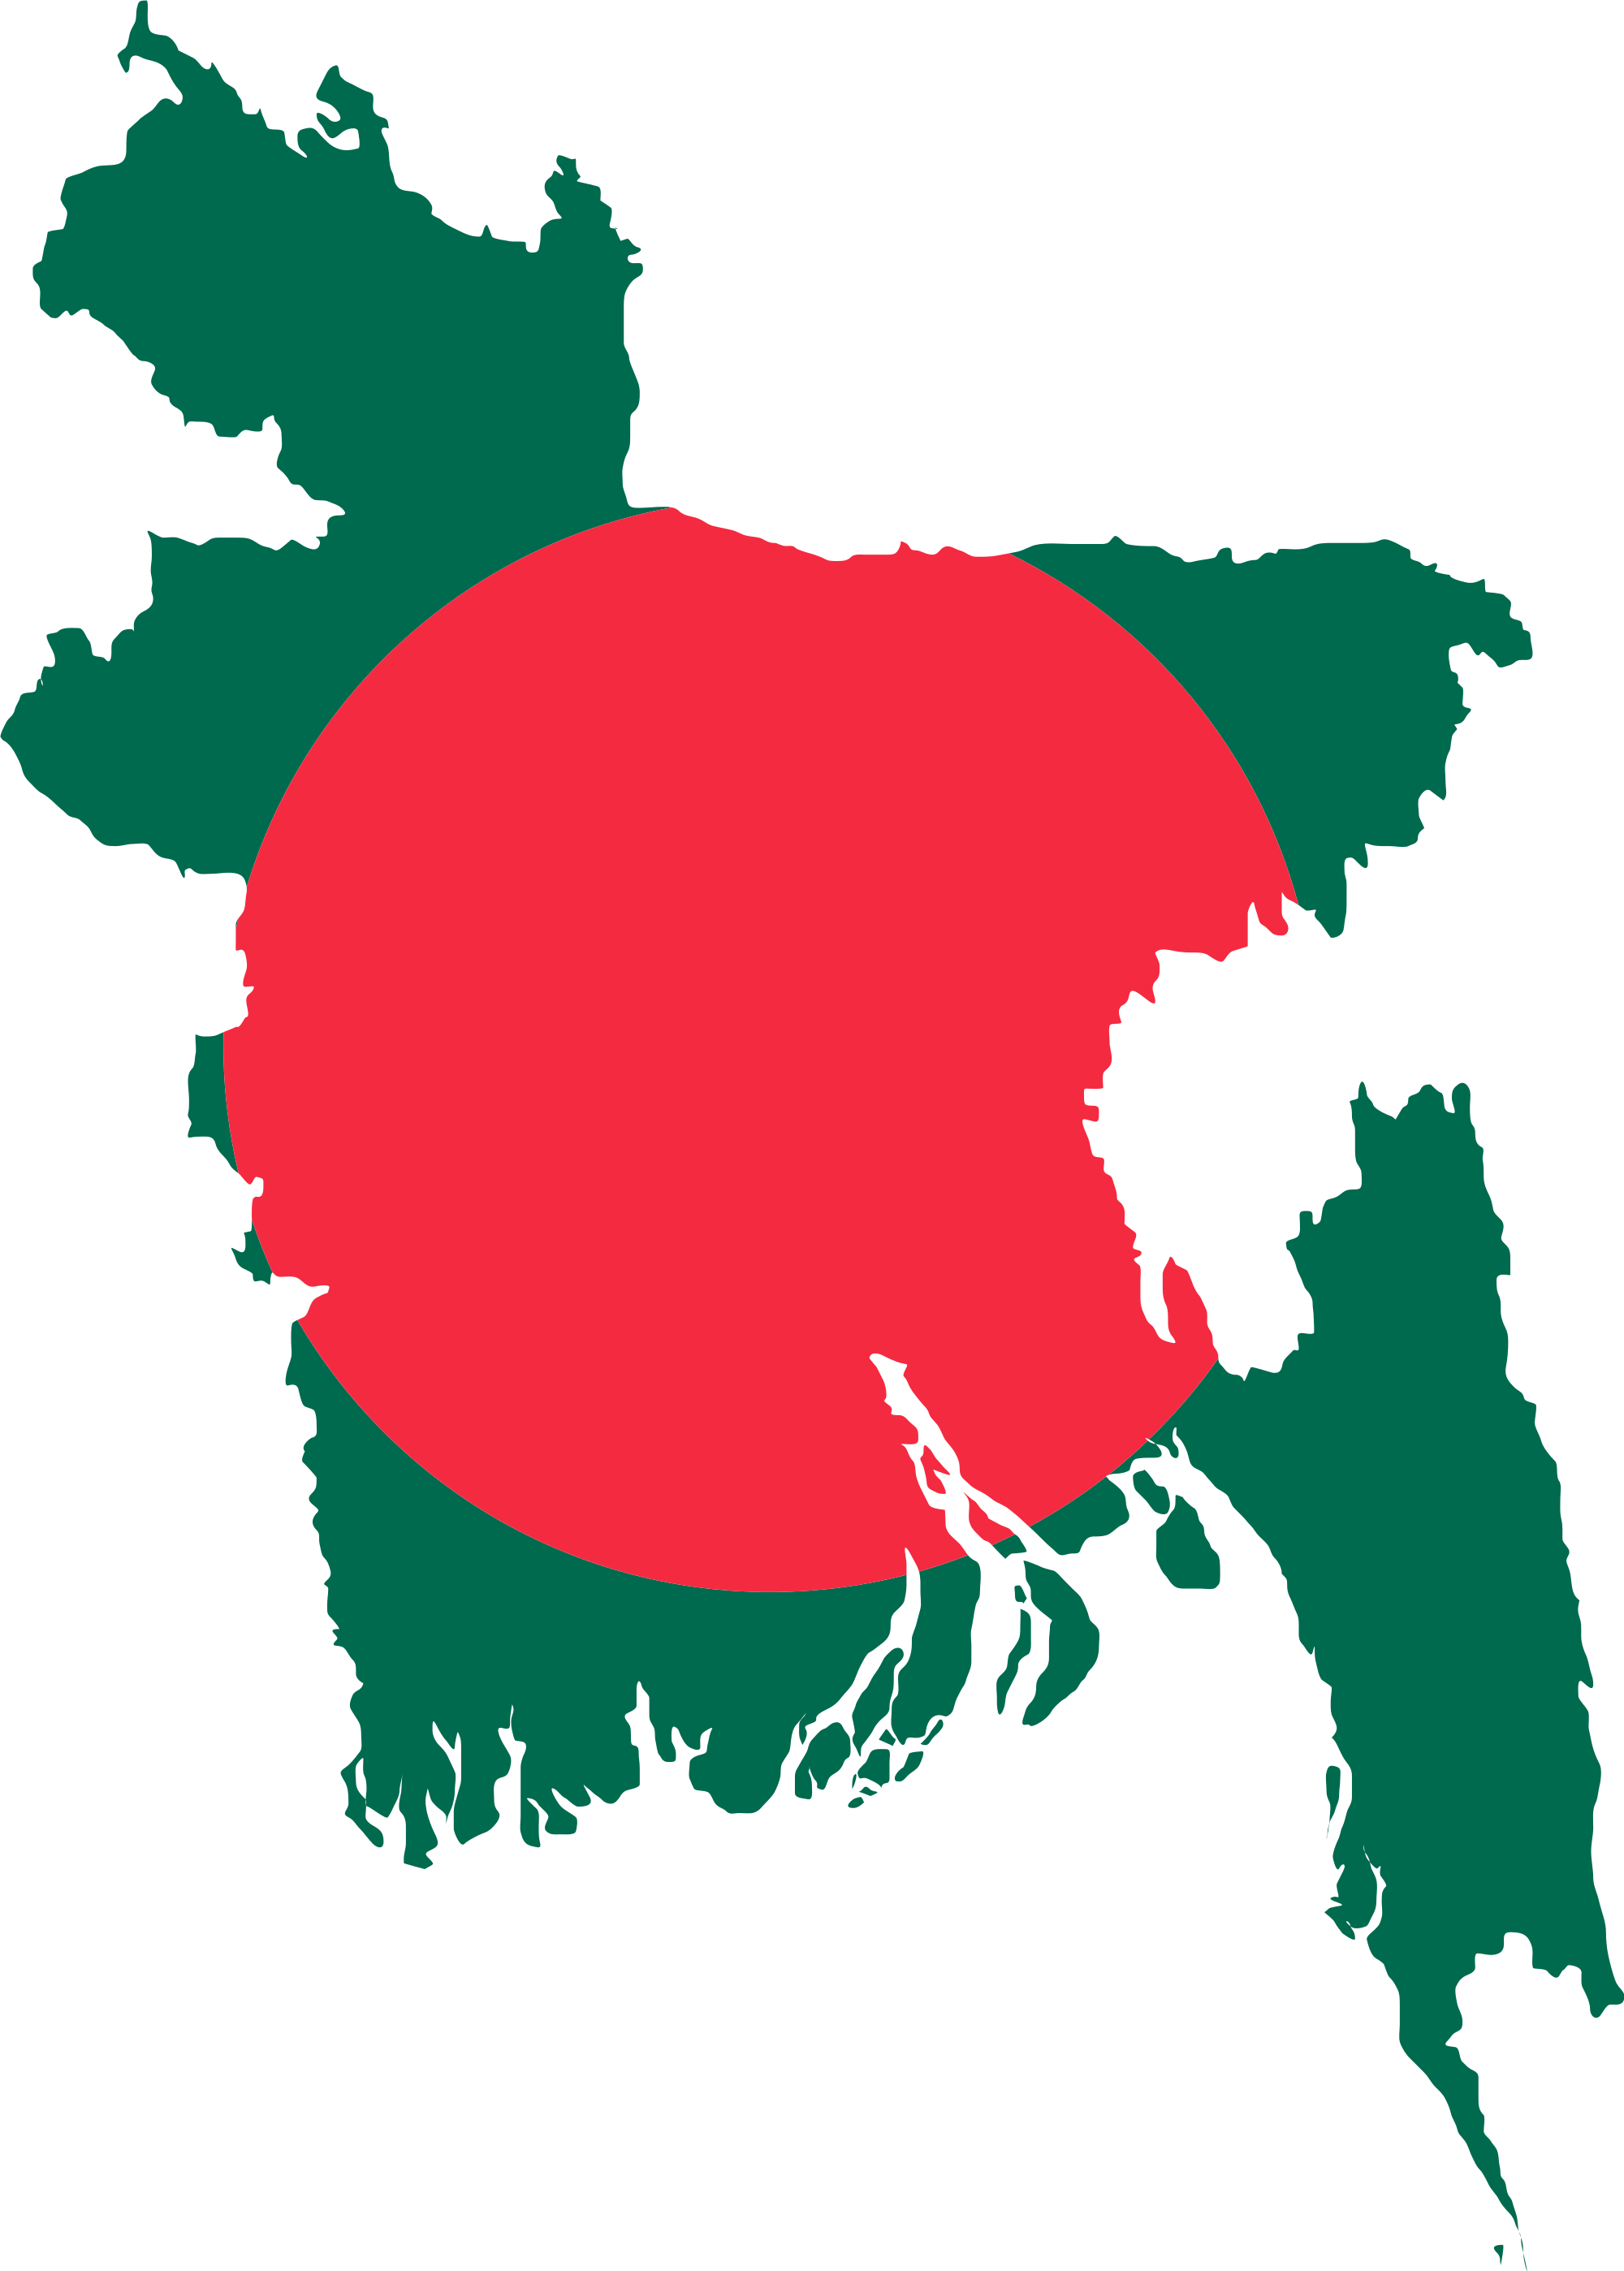 A Map Of Bangladesh With A Red Circle